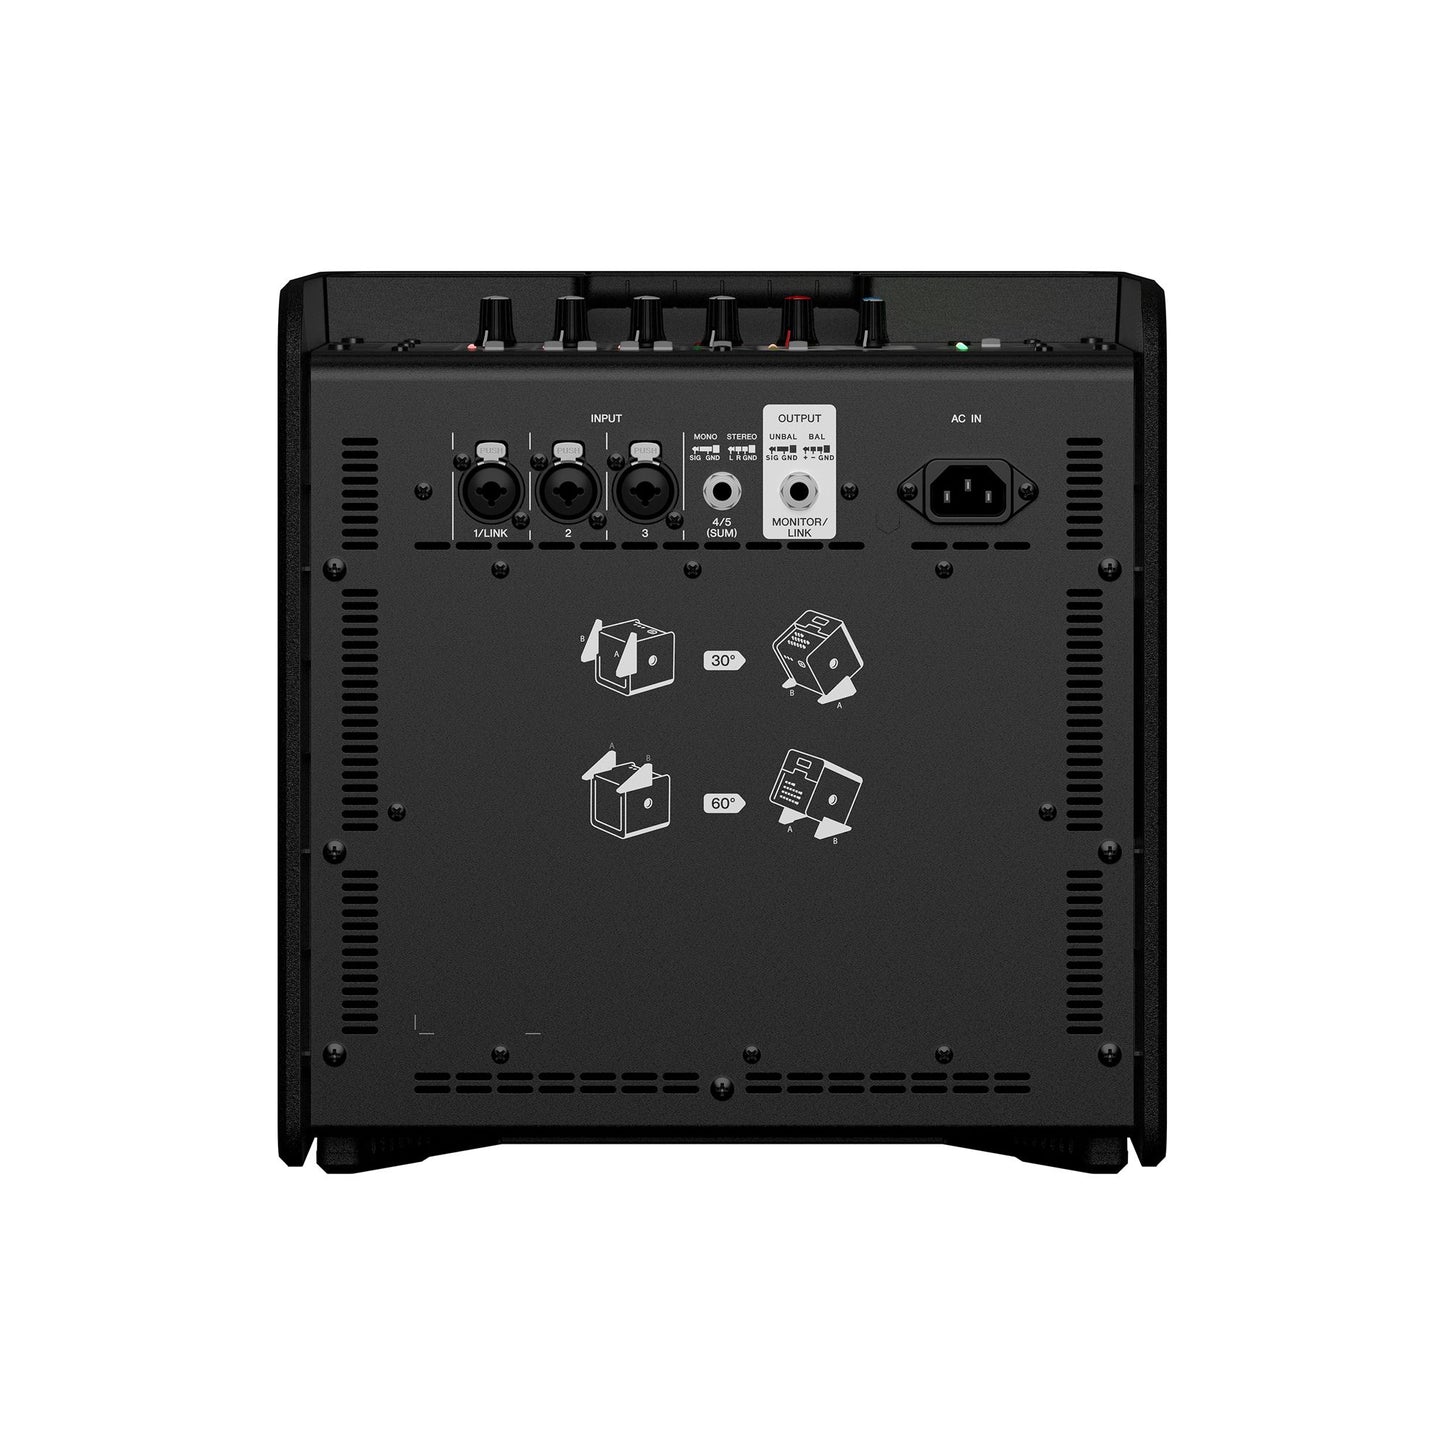 YAMAHA STAGEPAS200 PORTABLE PA SYSTEM STAGEPAS200